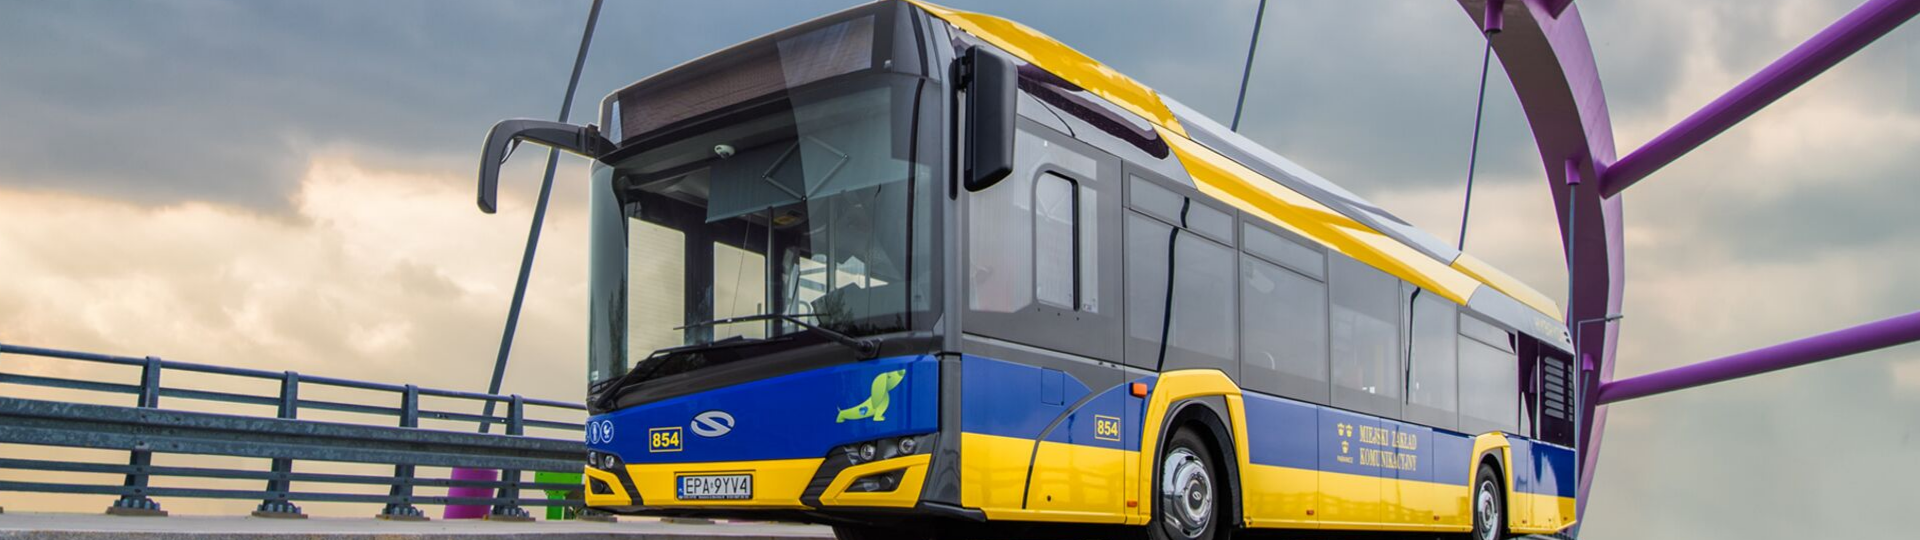 13 low-emission Solaris buses to be added to municipal transport fleet in Piła